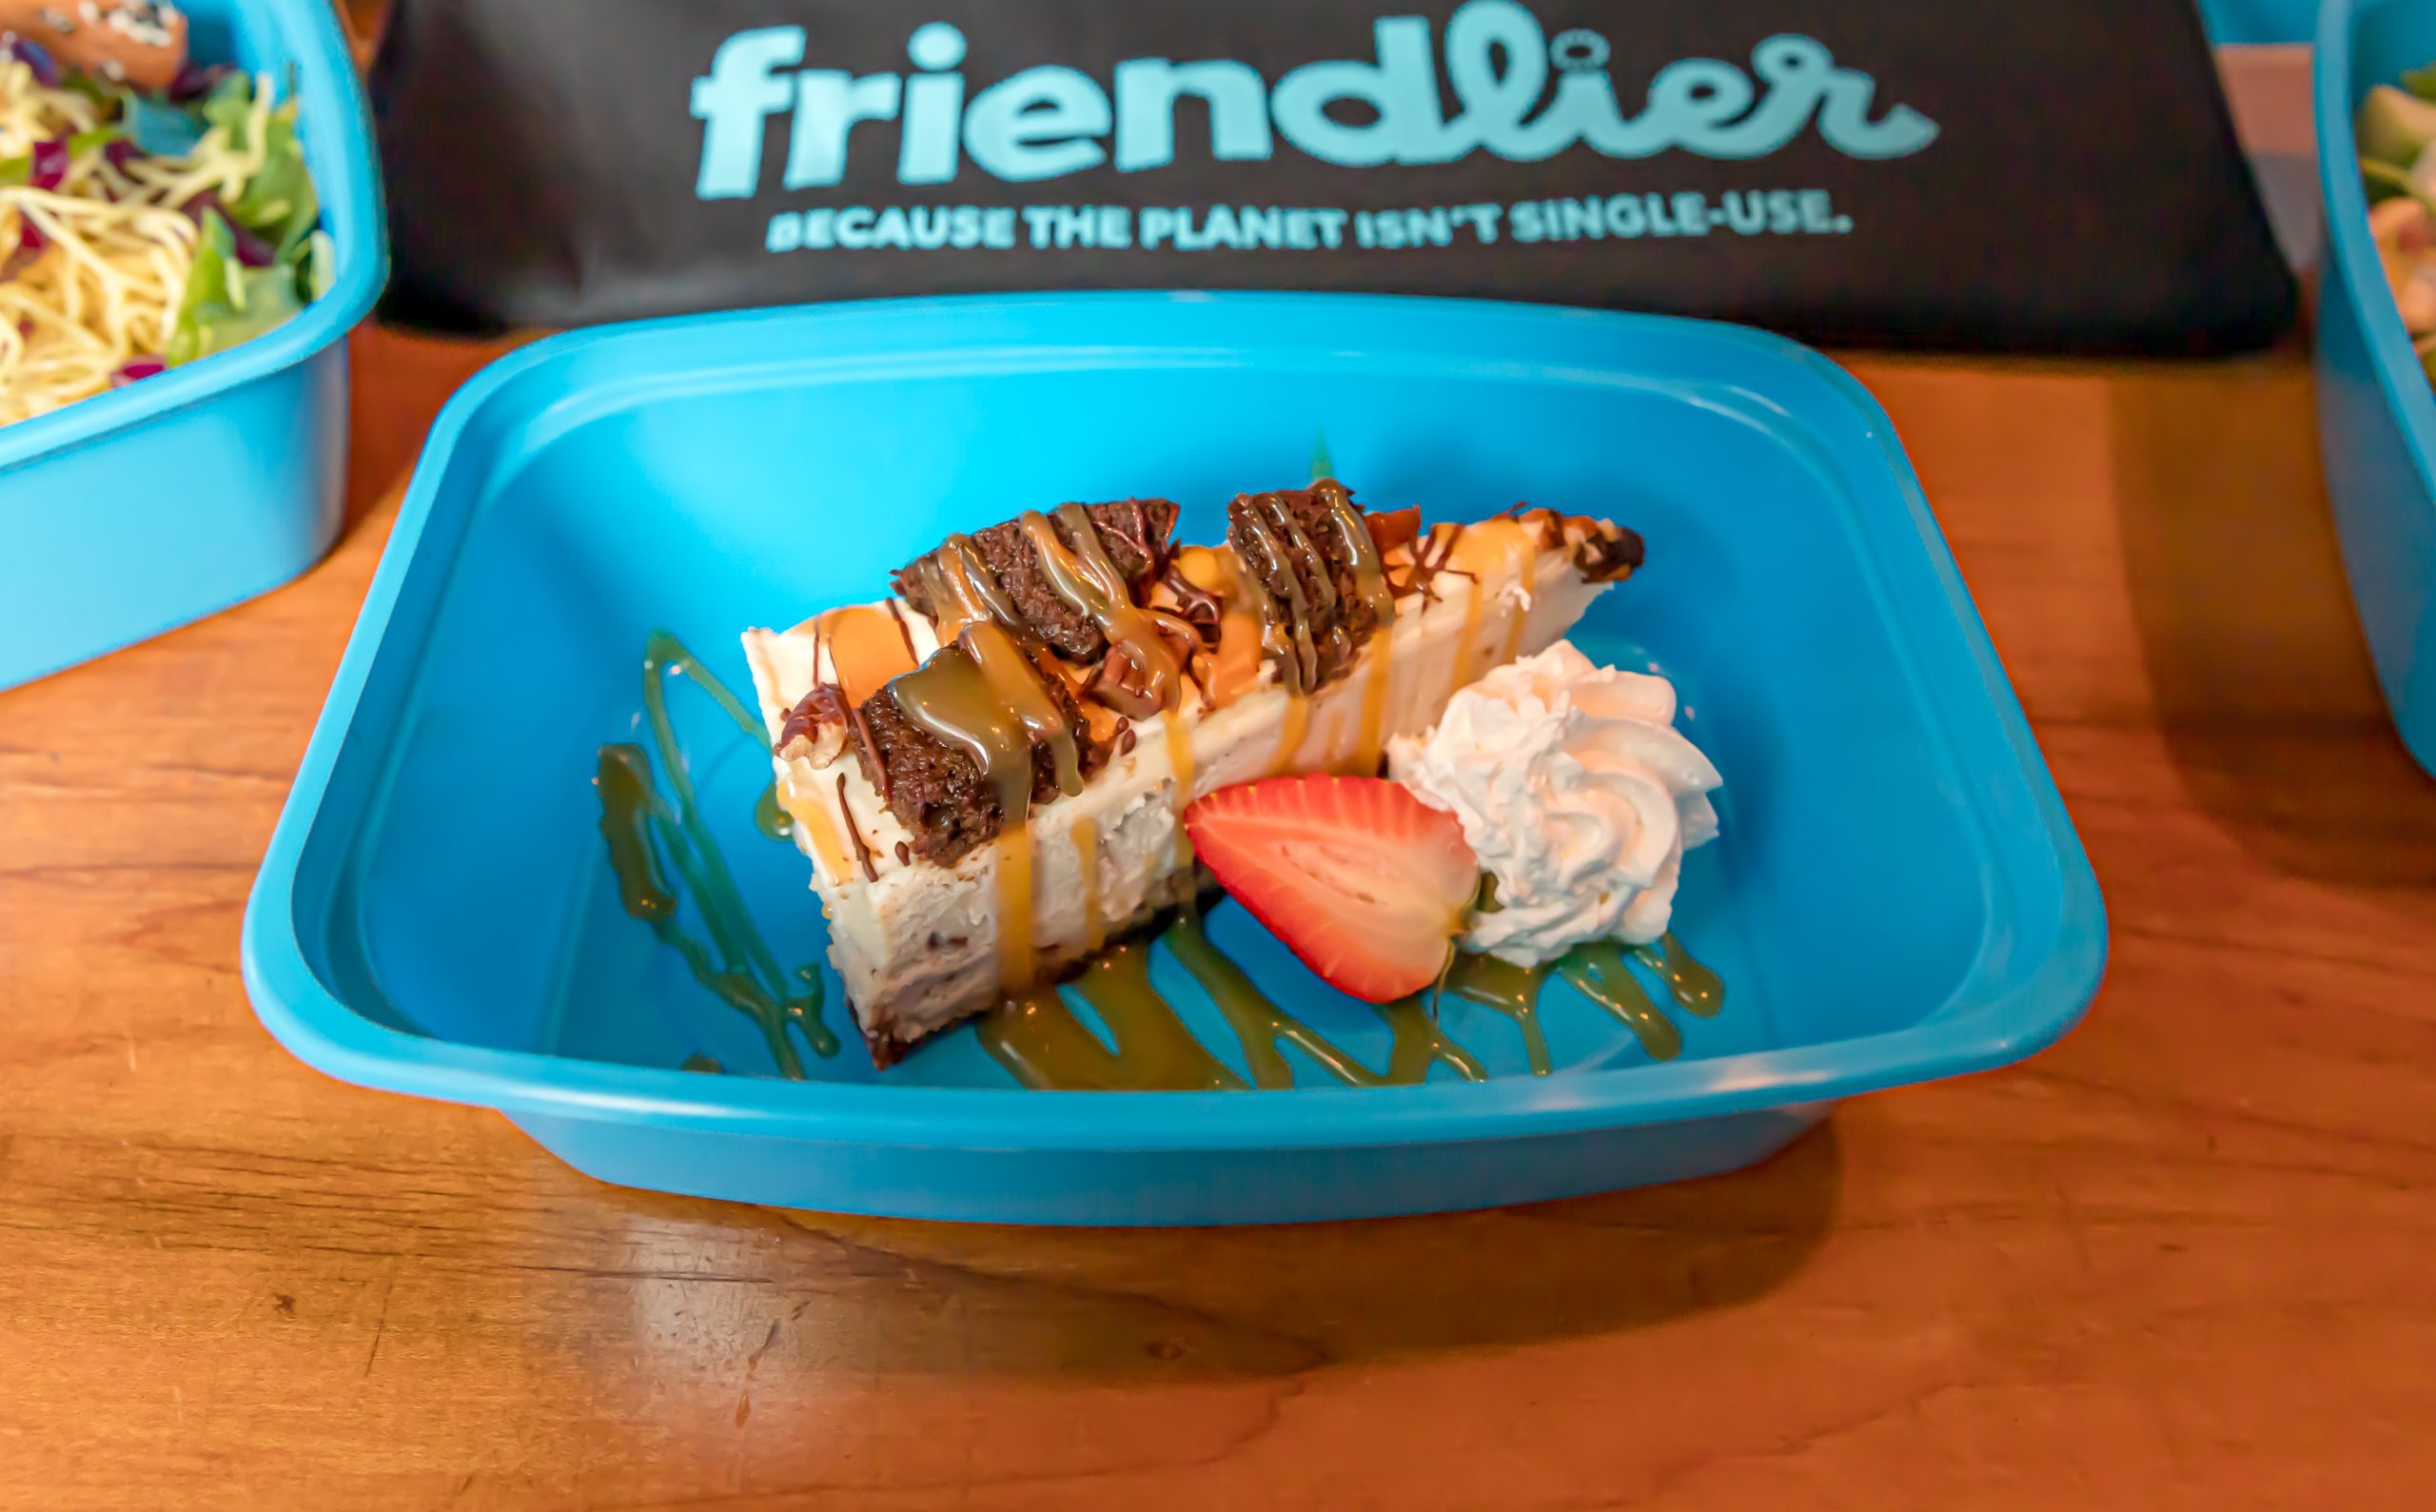 Photo of a blue takeout container with a slice of cheesecake next to Friendlier bag with motto “Because the planet isn’t single-use.”